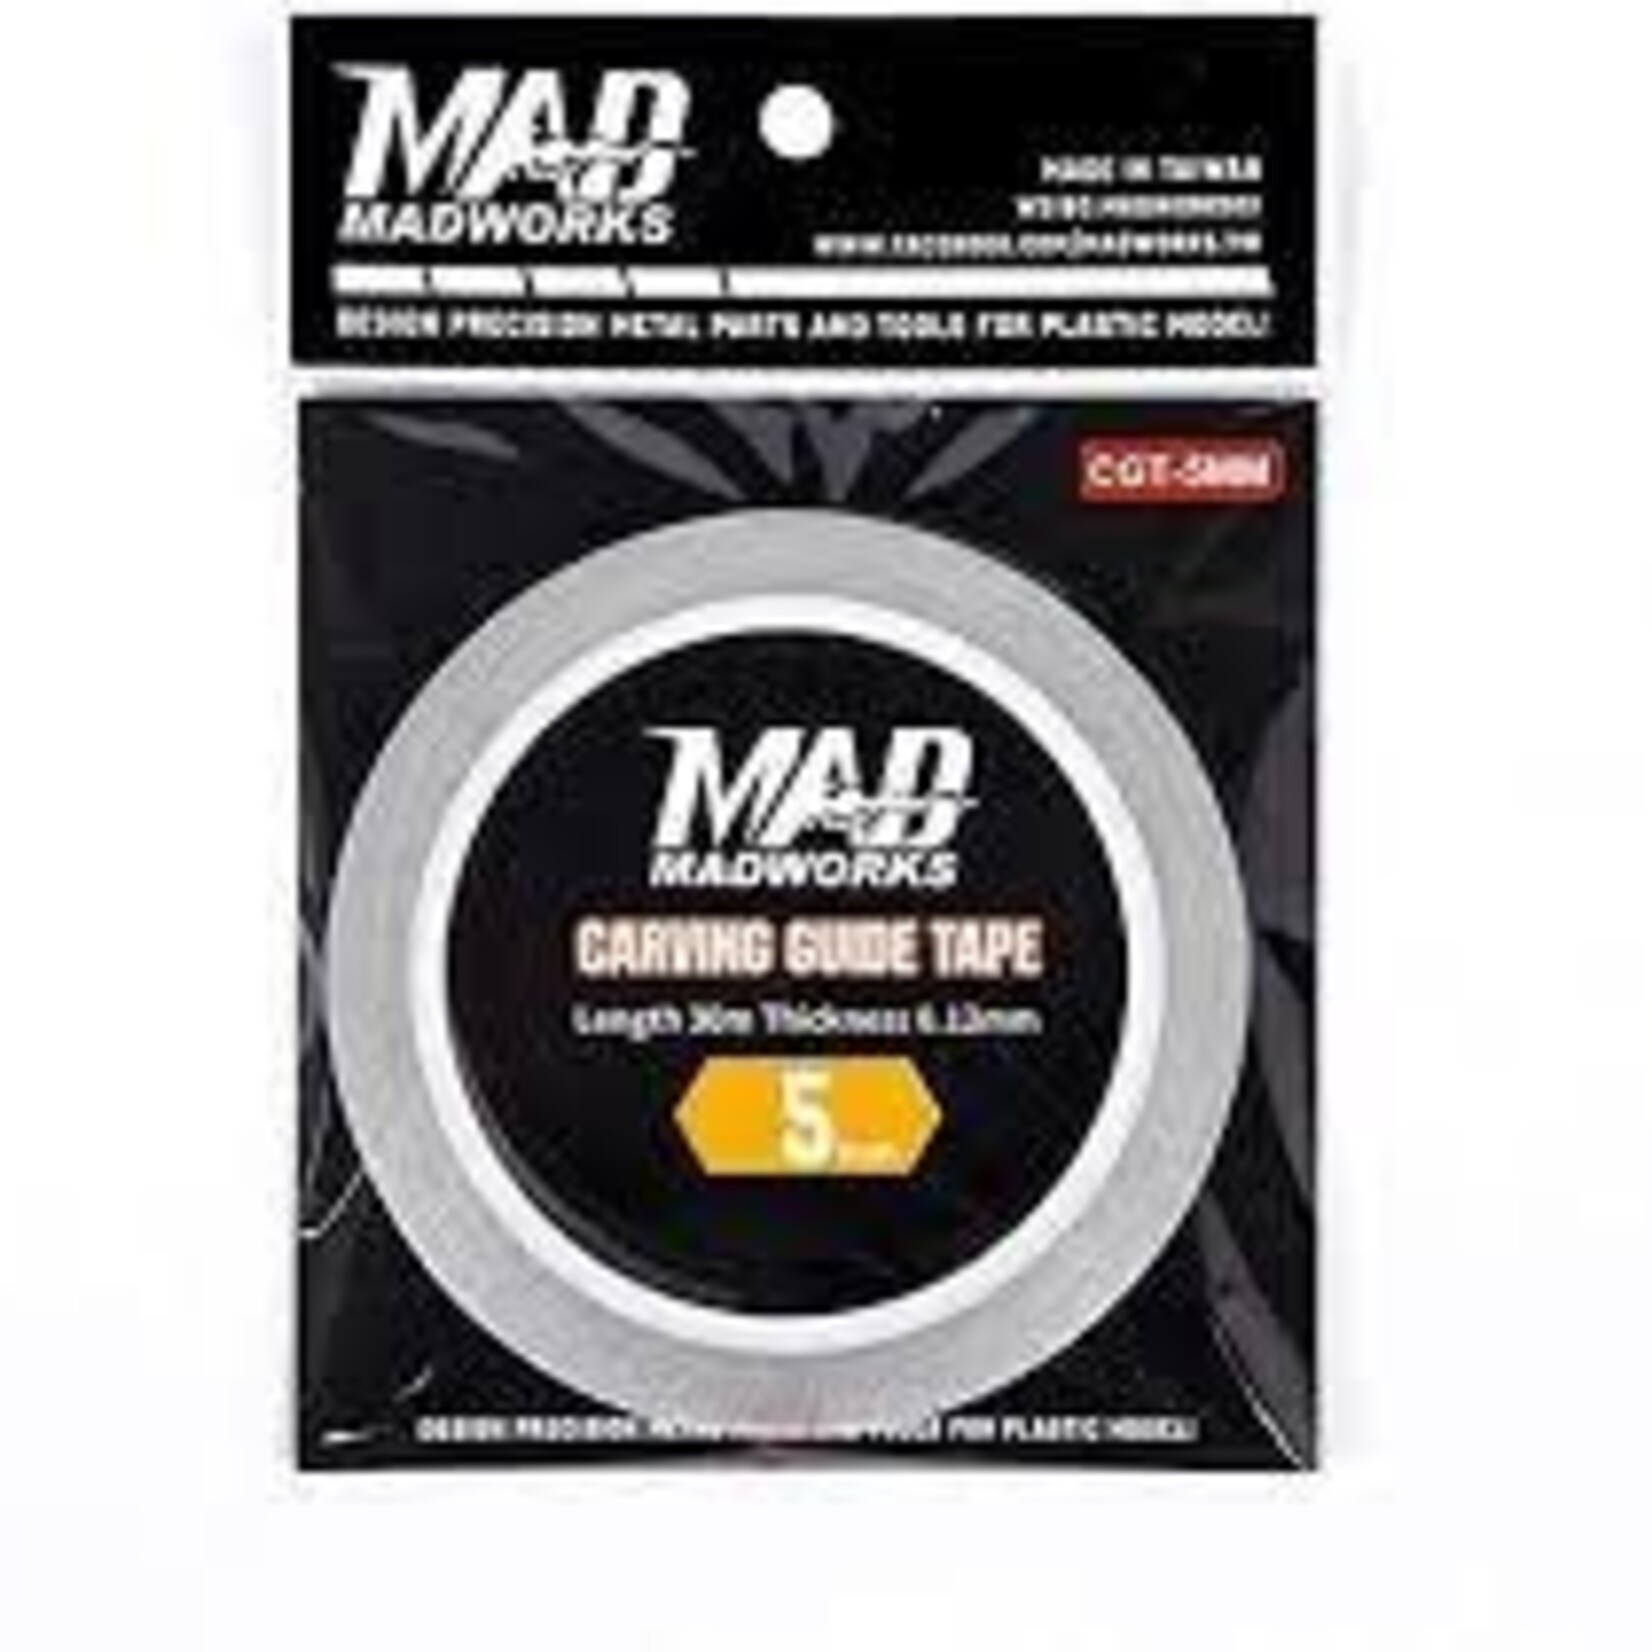 MADWORKS MADWORKS CGT-10MM CARVING GUIDE TAPE 10MM